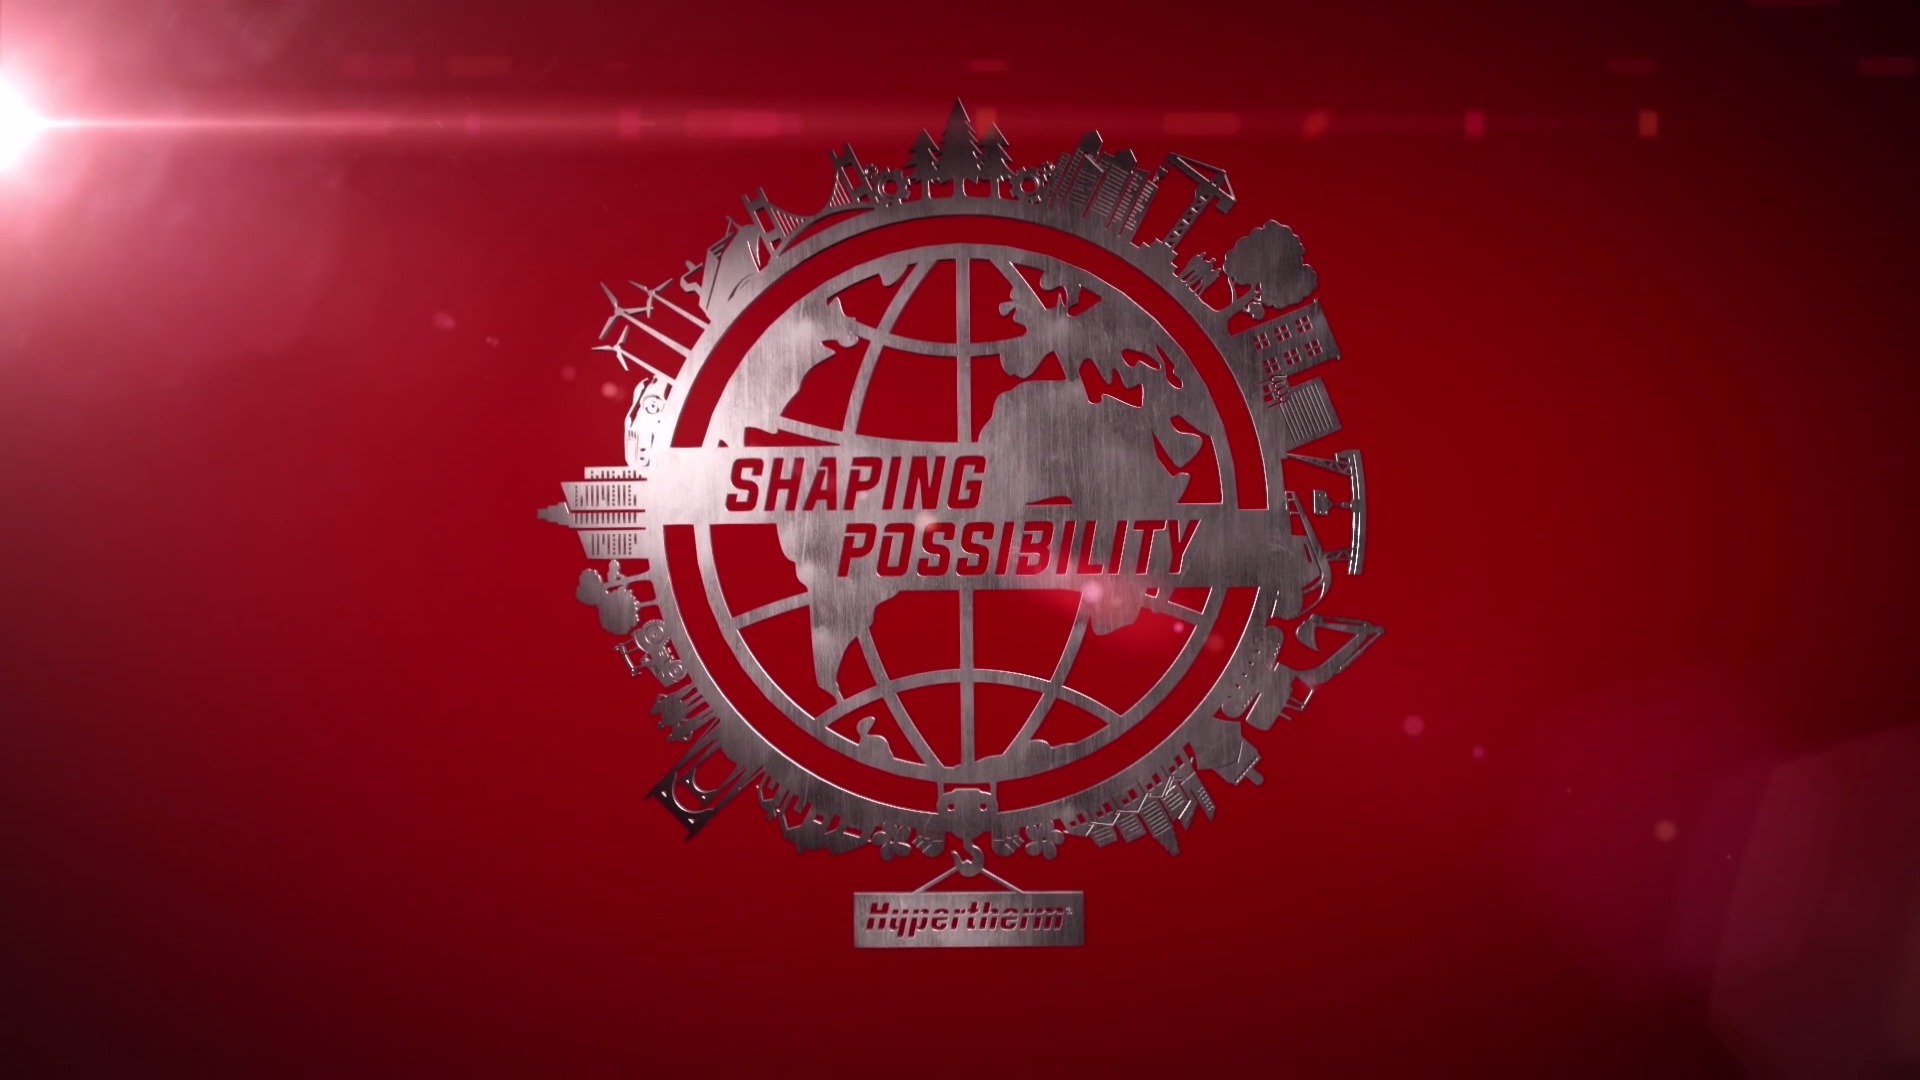 Shaping Possibility - IT